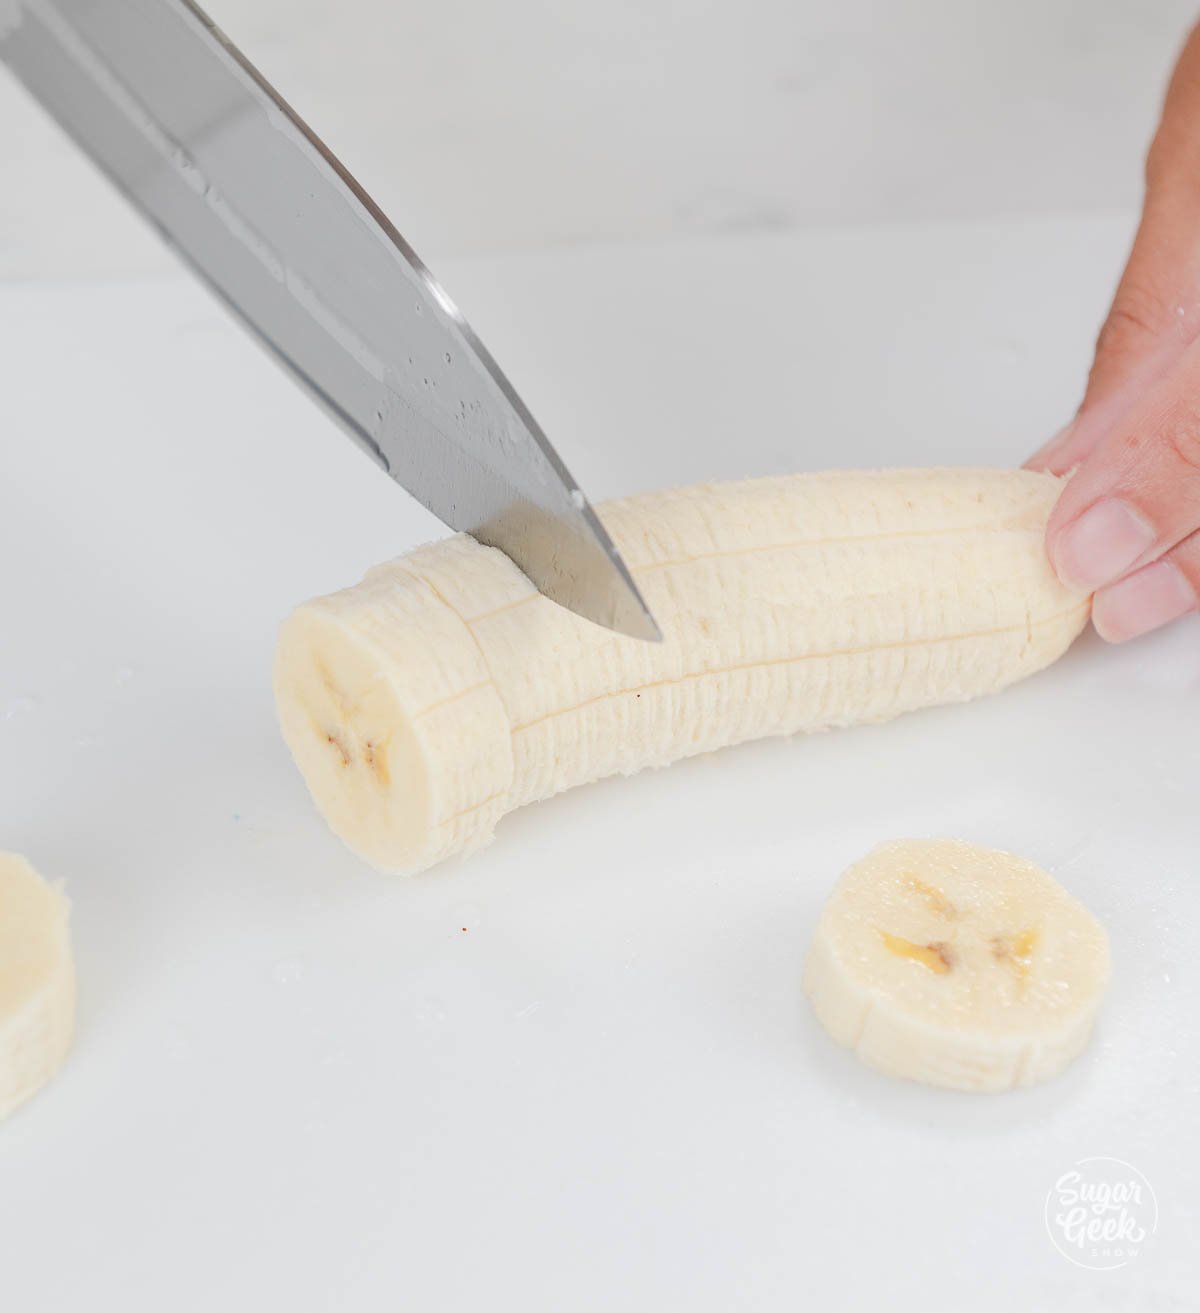 hand using knife to dice banana slices.